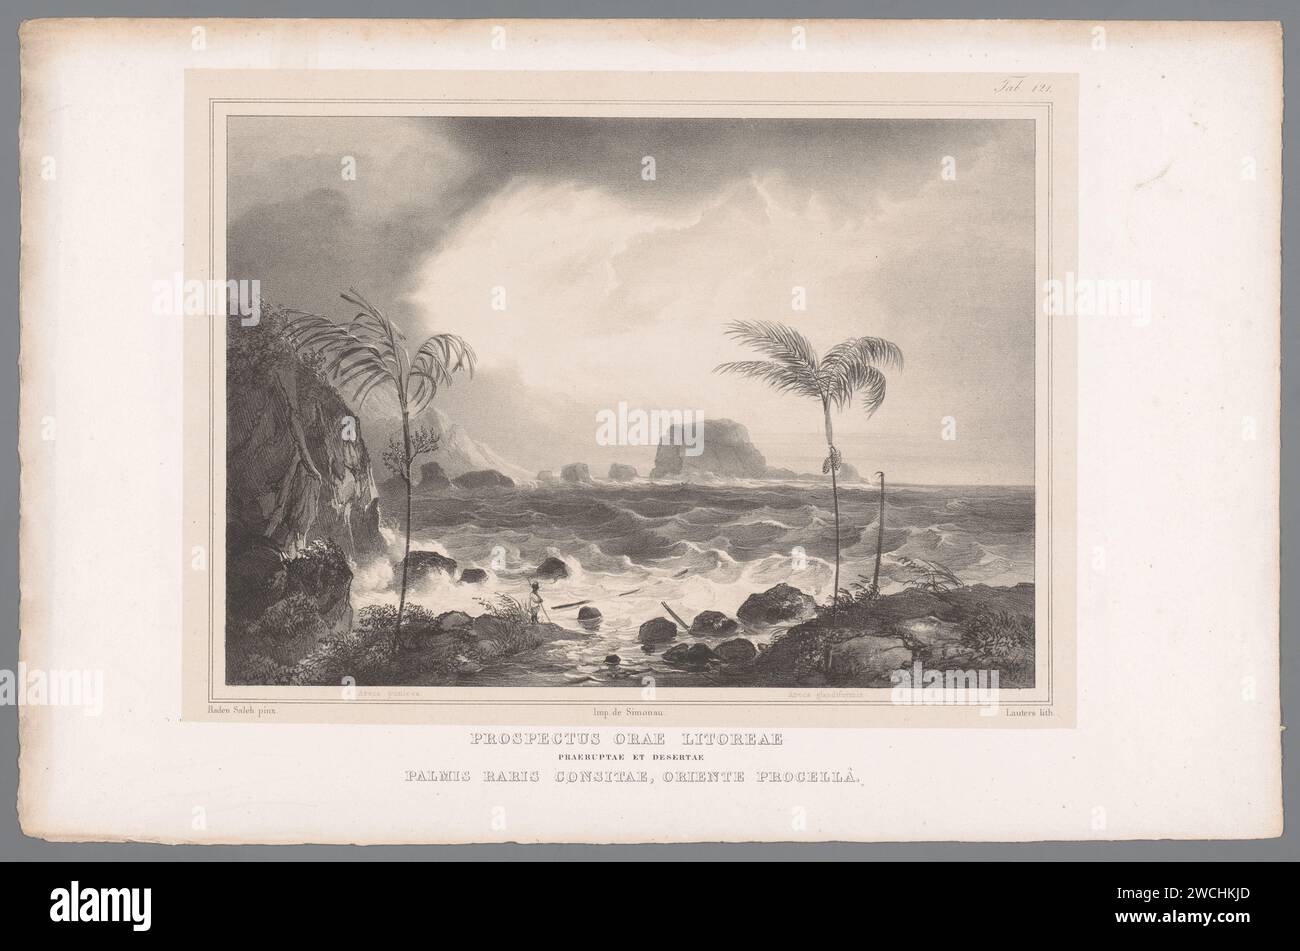 Two palms on the banks of a water feature, Paulus Lauters, After Raden Sarief Bastaman Saleh, 1838 - 1843 print Two types of palms: Areca Punicea or Pinanga Rumphiana, and the Areca Glandiformis. Numbered at the top right: tab. 121.  paper.  plants; vegetation. landscapes with waters, waterscapes, seascapes (in the temperate zone) Stock Photo